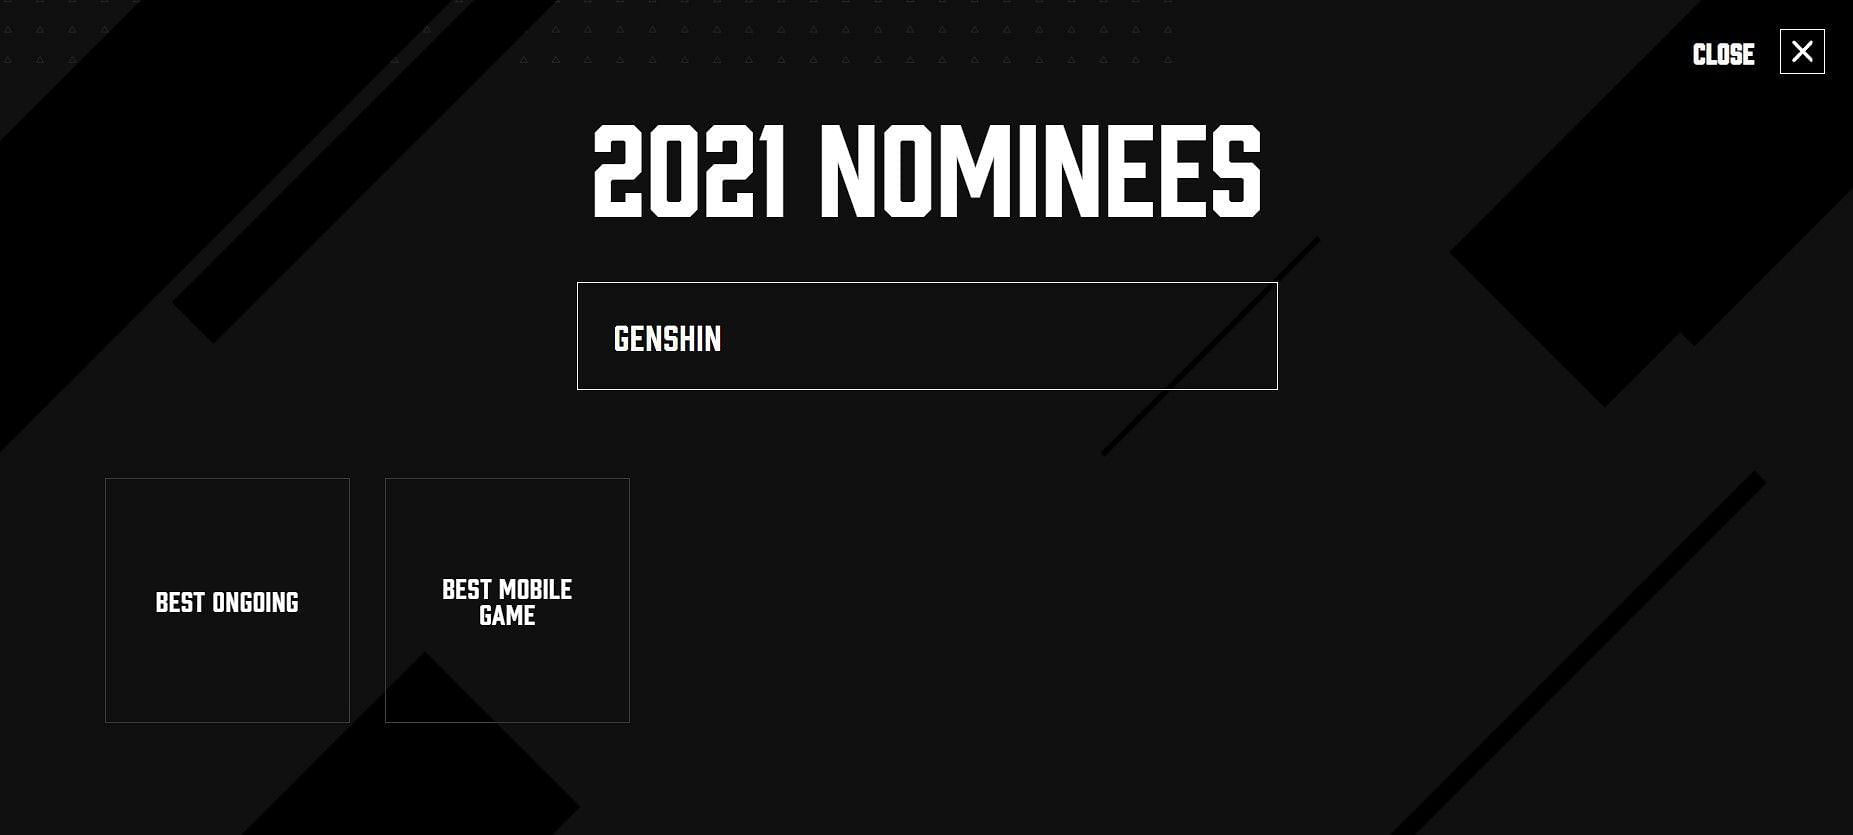 The two categories relevant to Genshin Impact fans (Image via The Game Awards 2021)